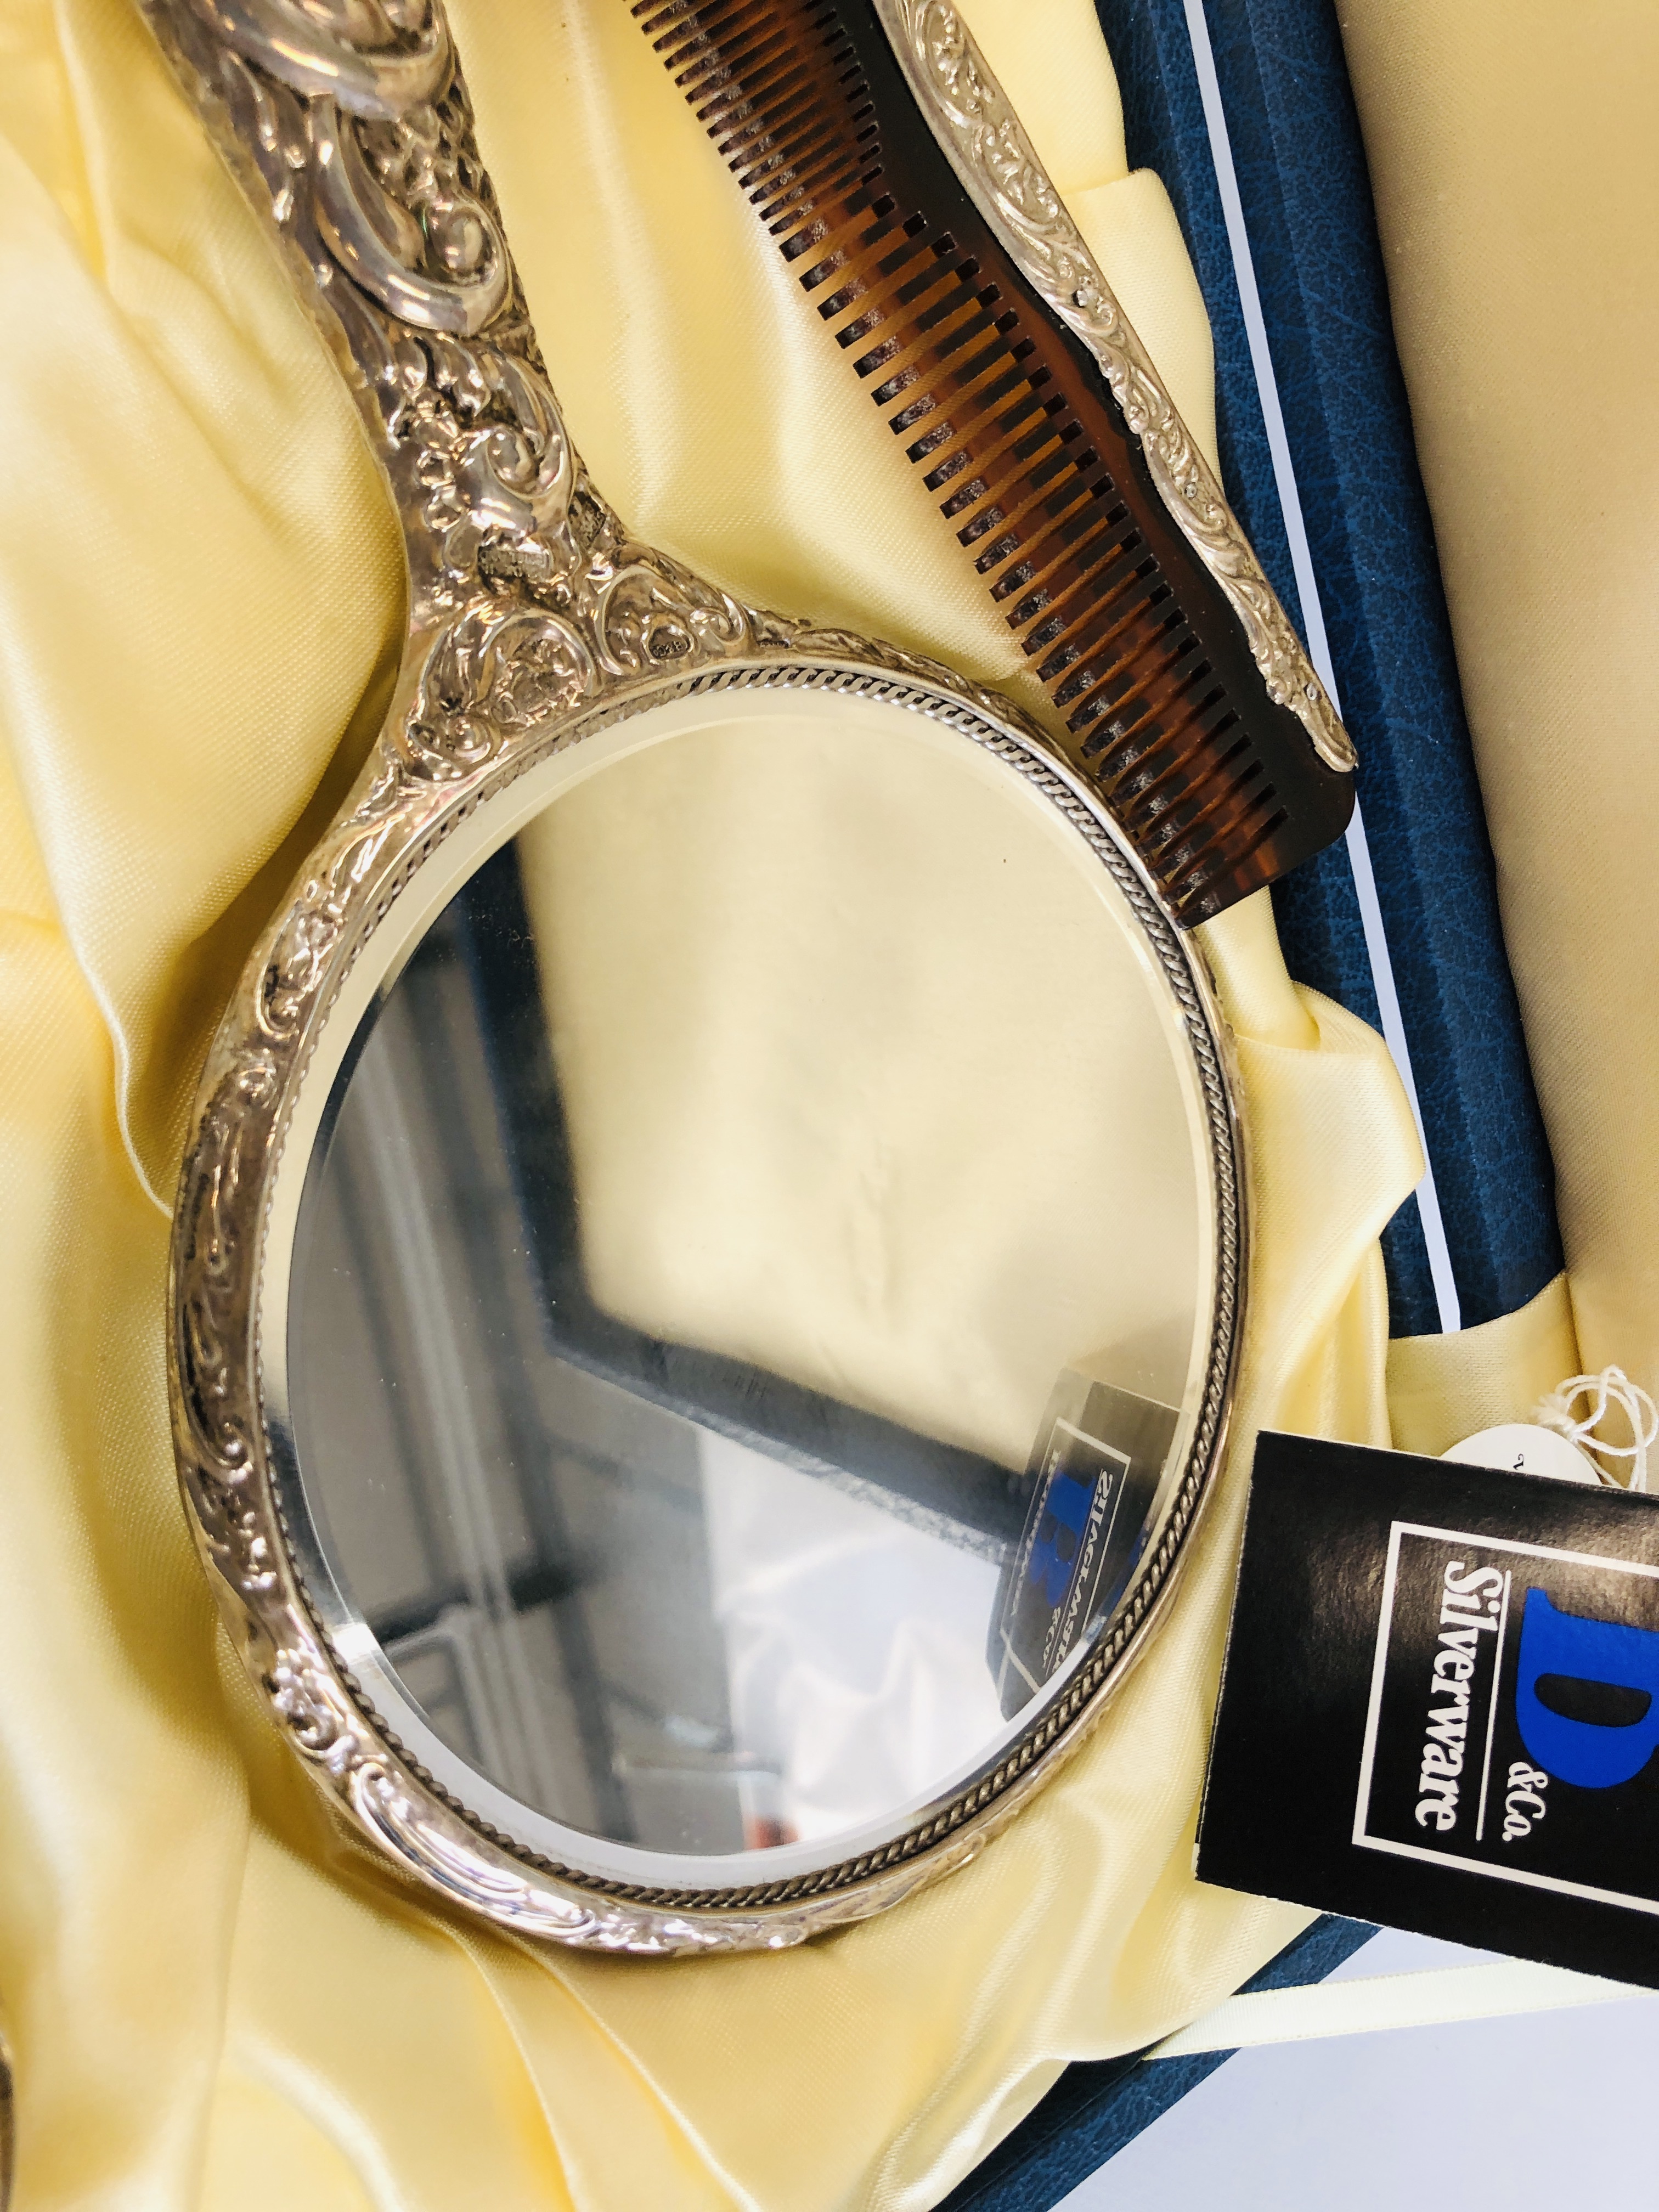 A VINTAGE 3 PIECE CASED SILVER BACKED BRUSH SET (COMPRISING MIRROR, BRUSH AND COMB). - Image 9 of 12